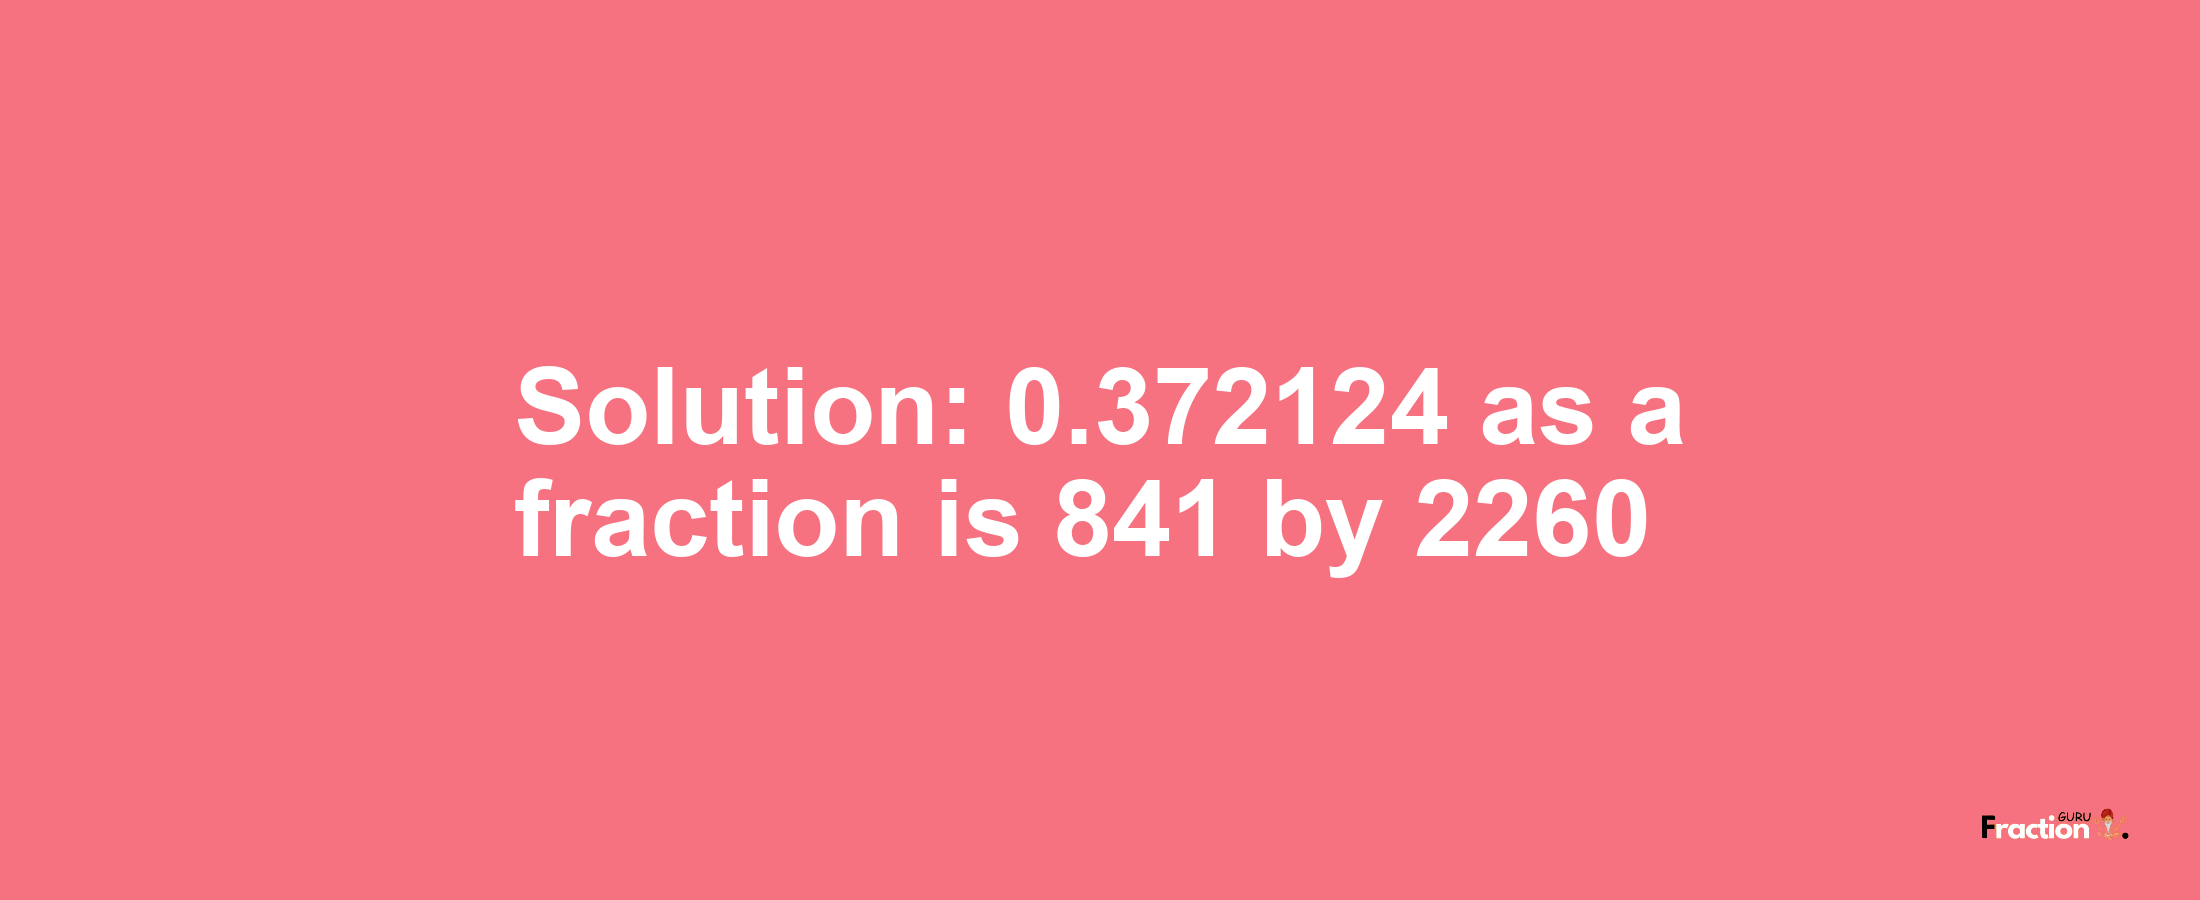 Solution:0.372124 as a fraction is 841/2260